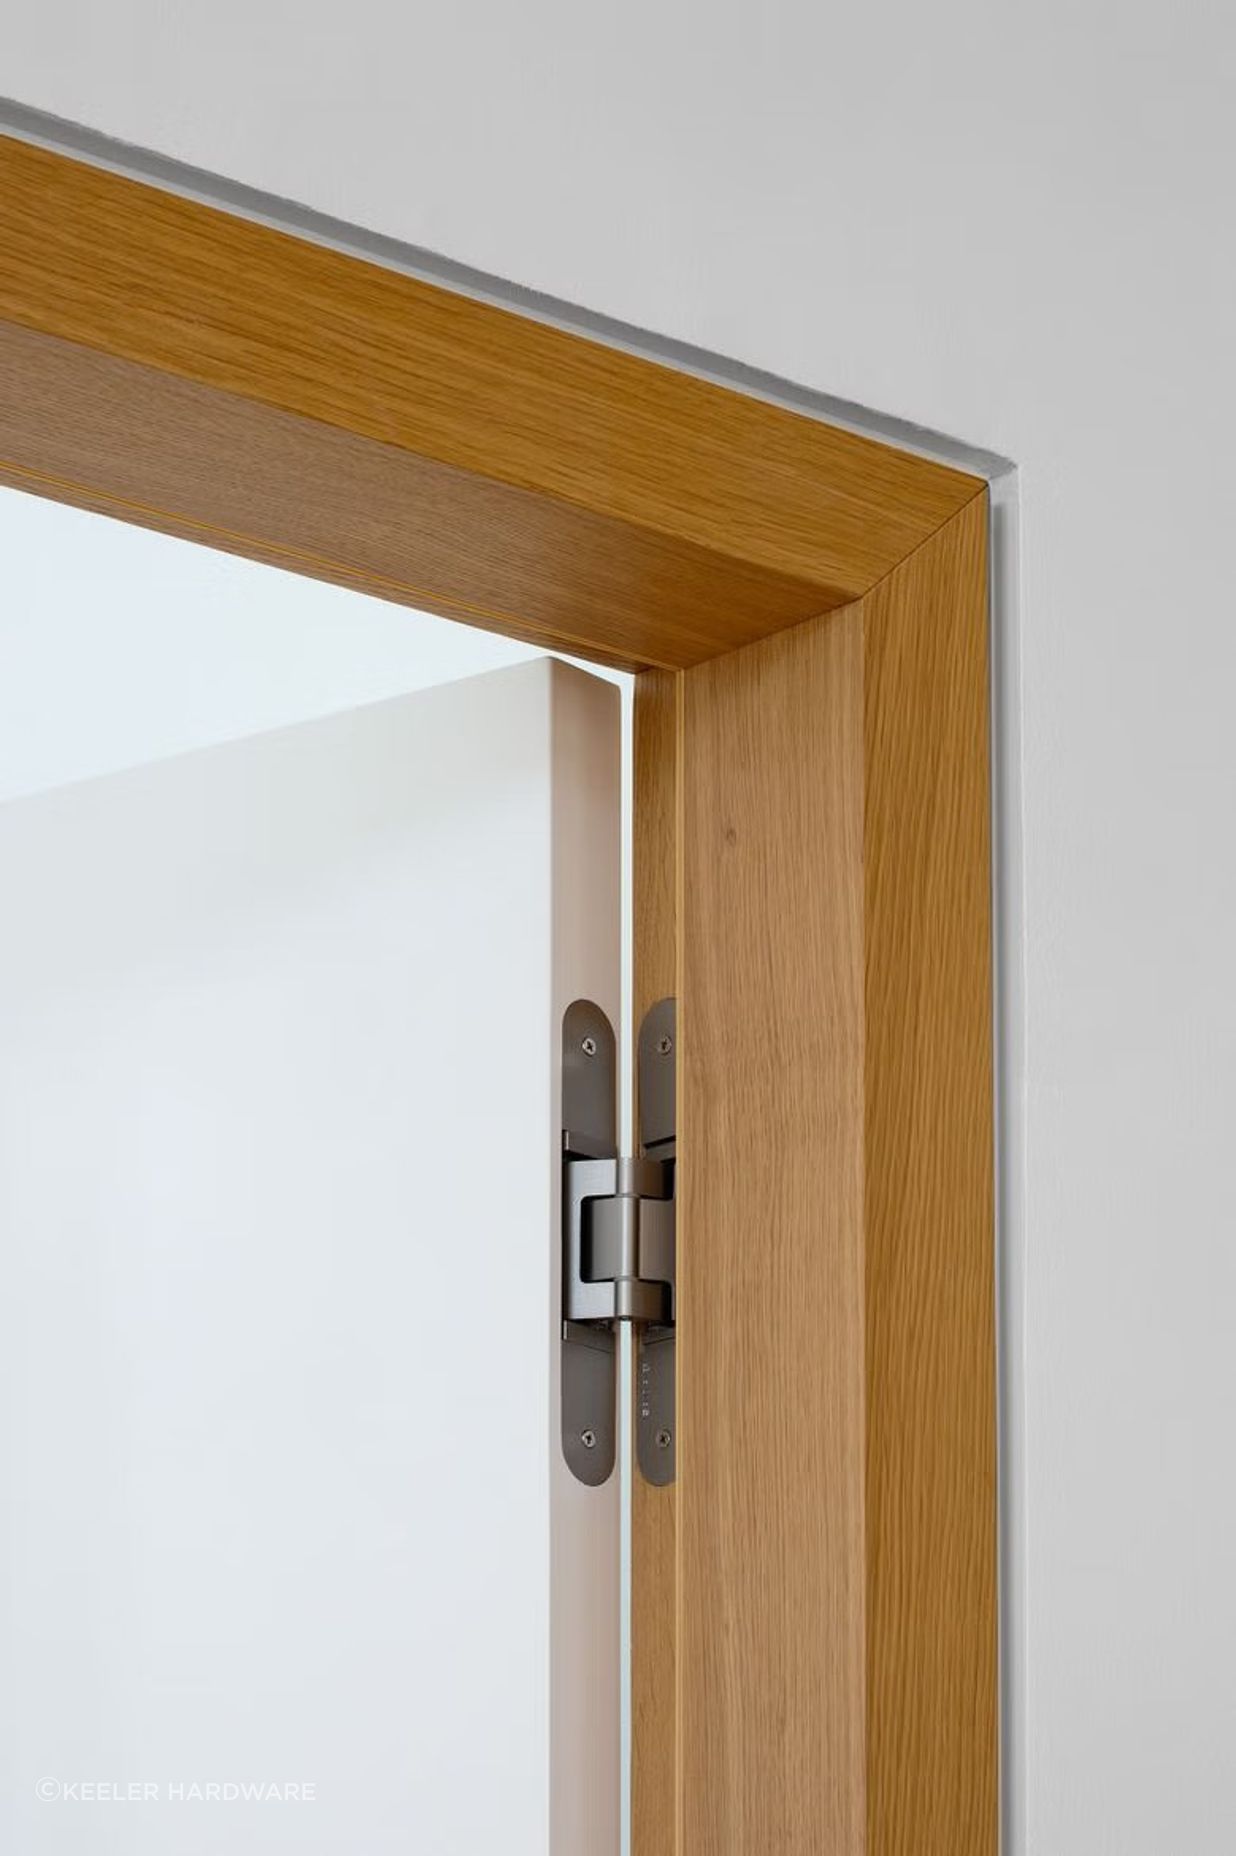 This TECTUS concealed hinge from Halliday + Baillie compliments the sleek aesthetic of the natural timber door frame